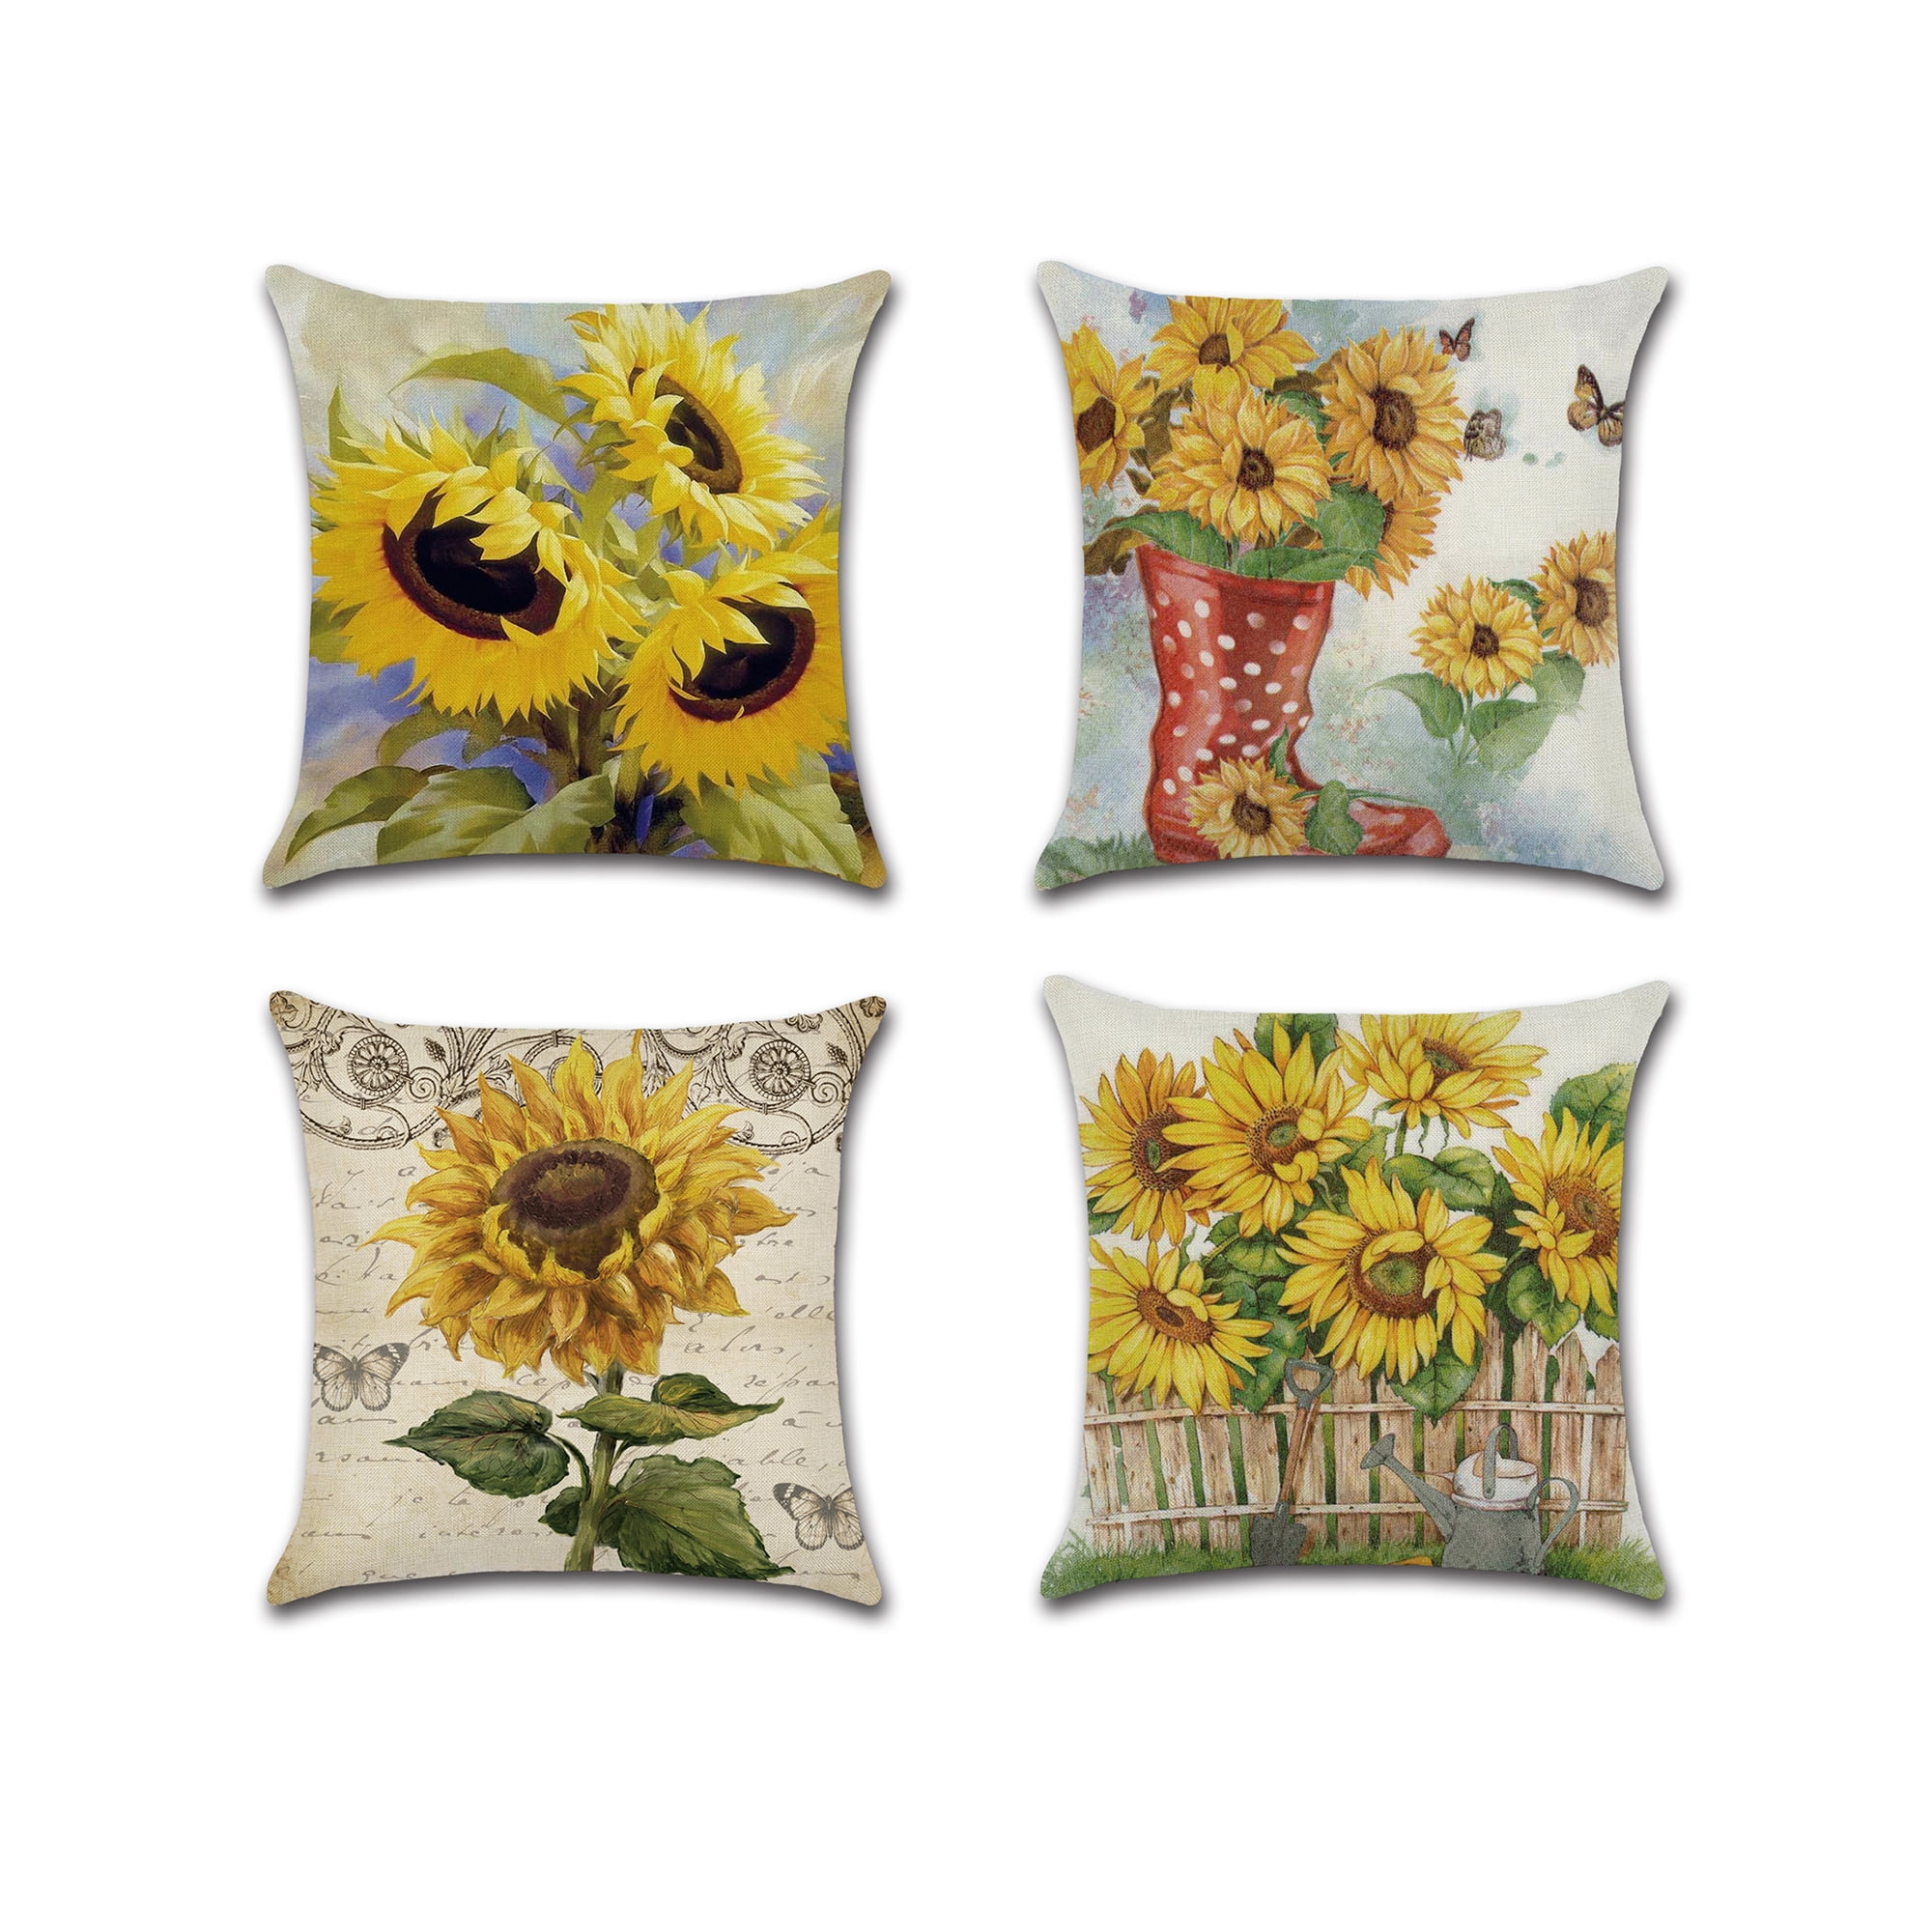 Sunflower Asamour Sunflower Throw Pillow Covers Cotton Linen Vintage Yellow Flower and Green Leaves Spring Summer Decorative Pillow Case Cotton Linen Farmhouse Cushion Cover Square 18x18 Inches 